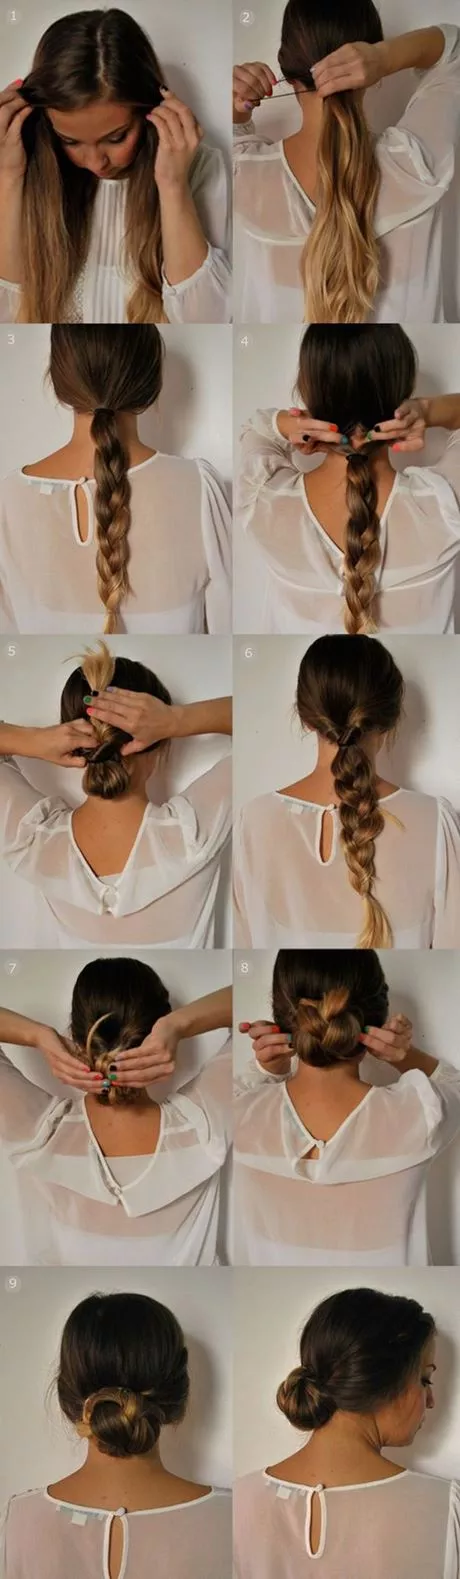 Easy but beautiful hairstyles easy-but-beautiful-hairstyles-41_12-5-5